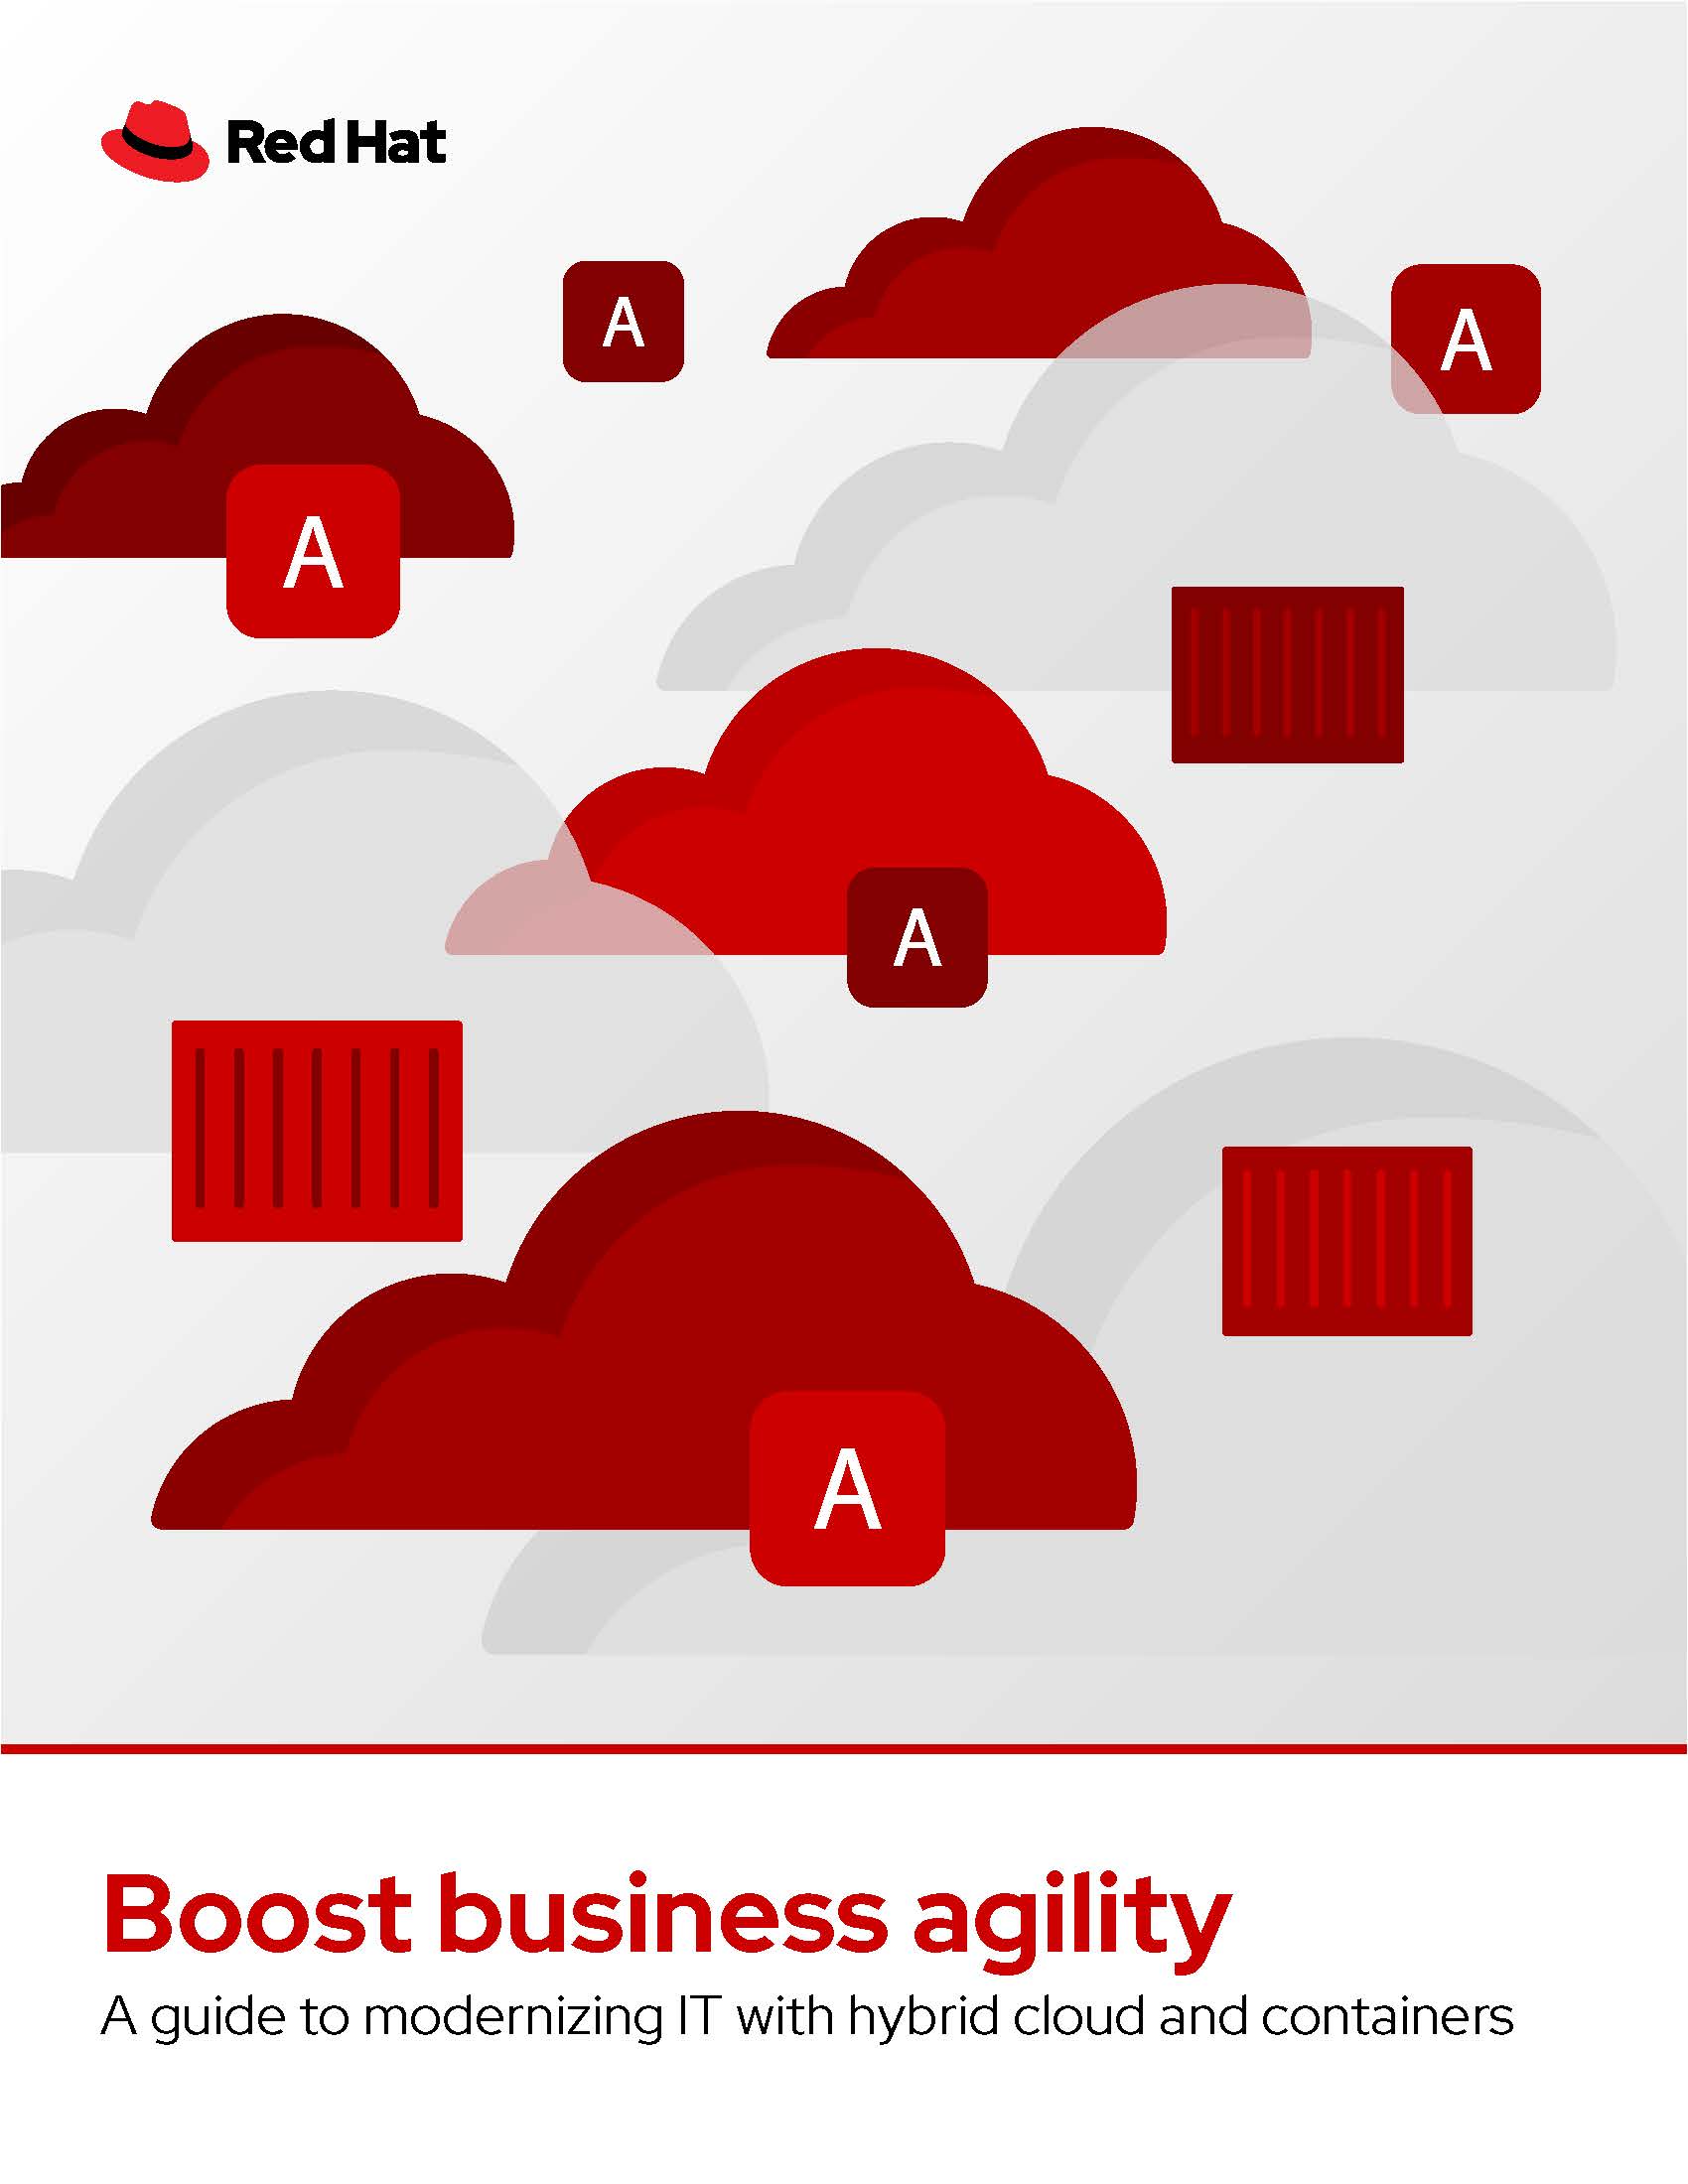 cl-boost-business-agility-hybrid-cloud-containers-ebook-f14287-201904-en_Page_01